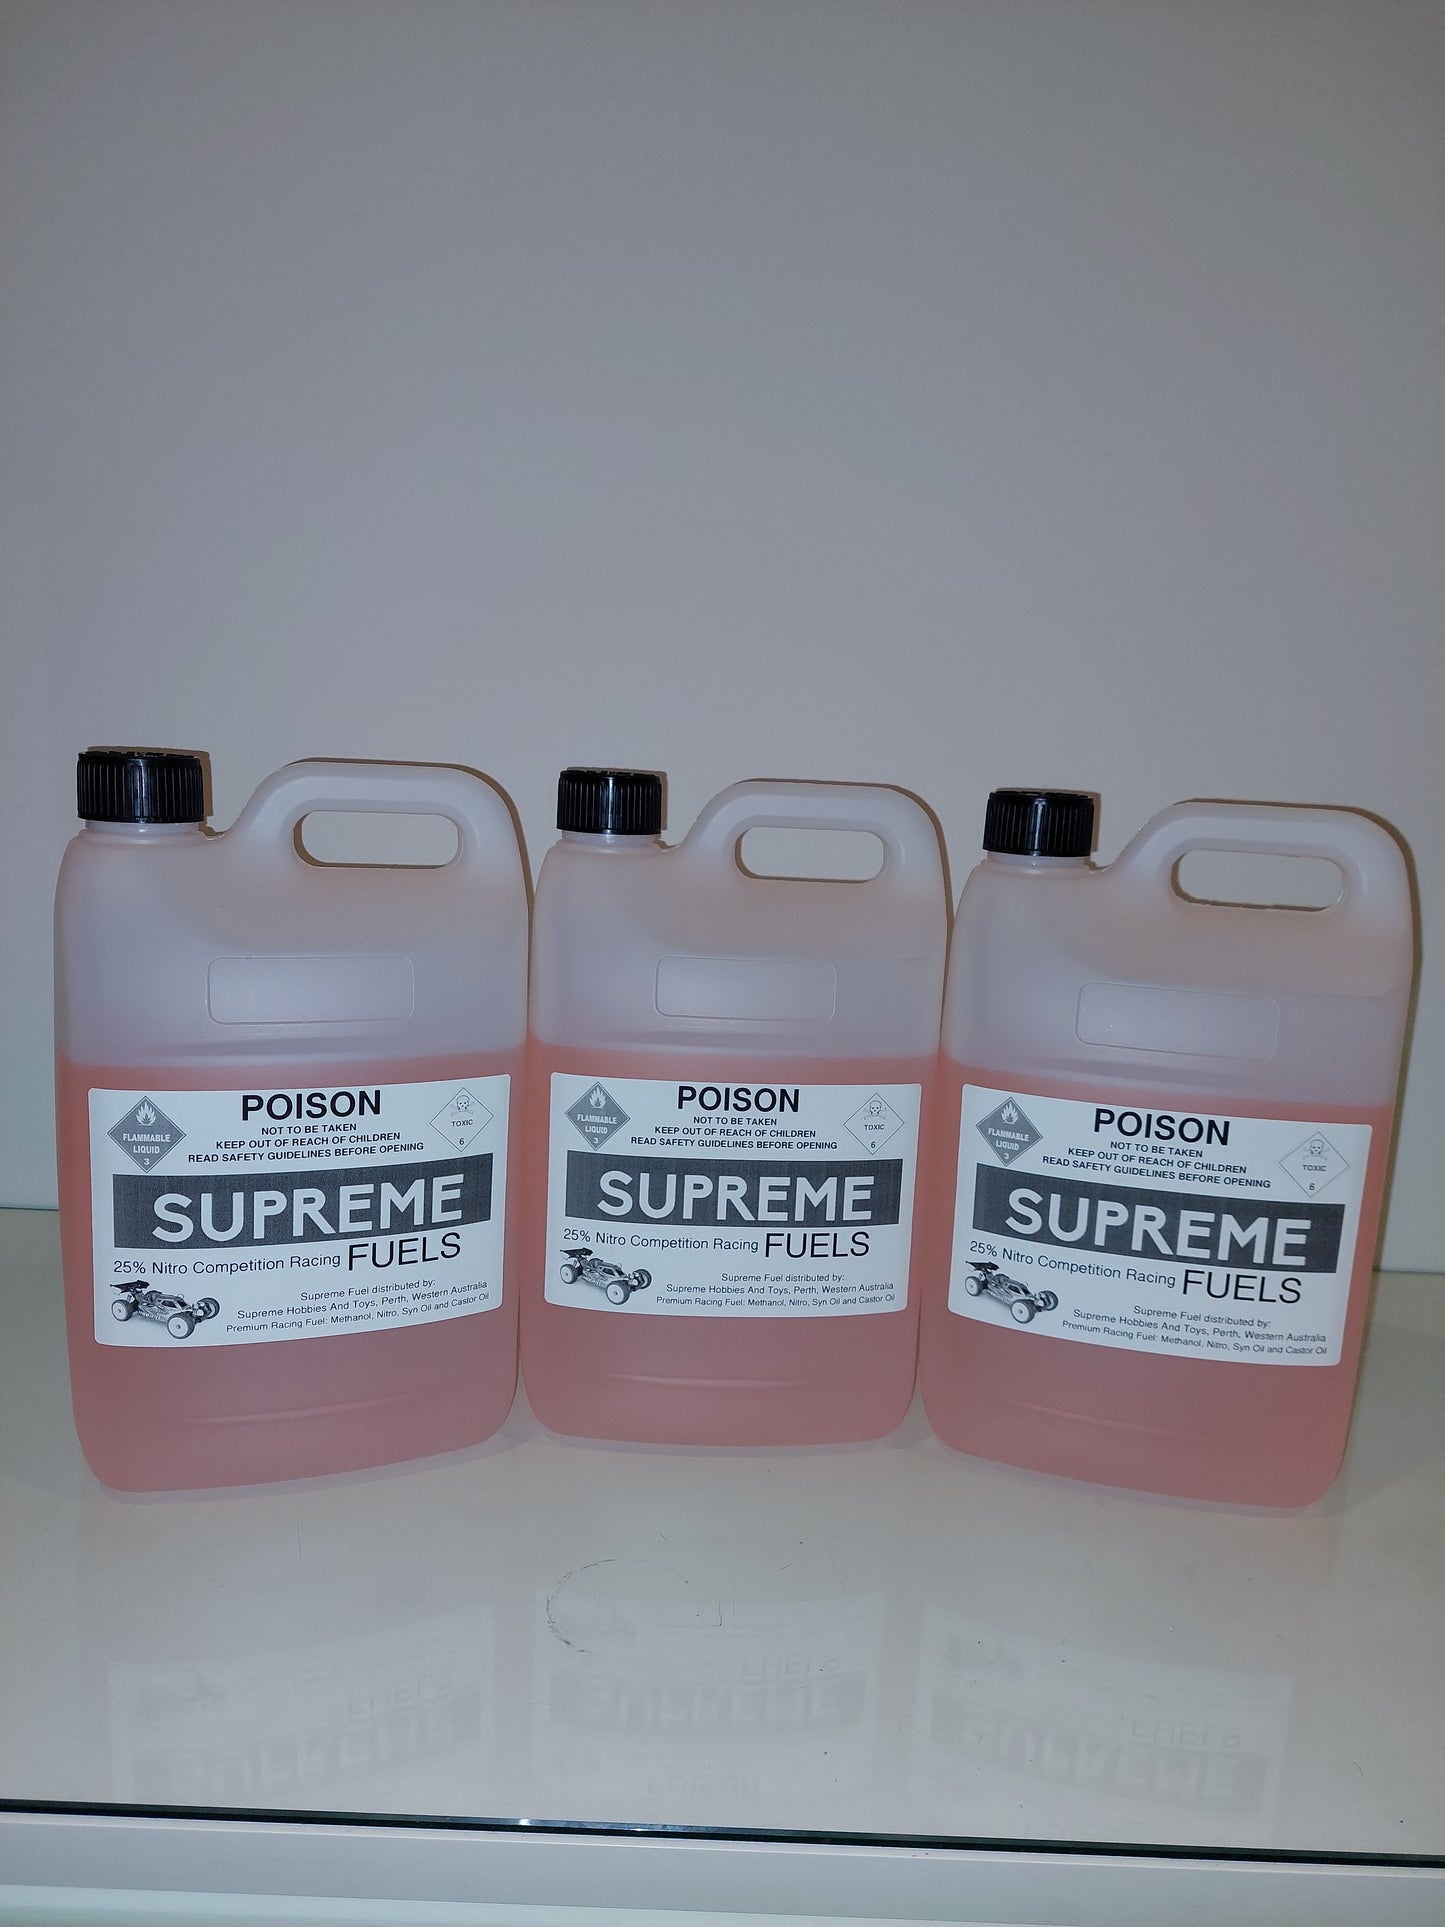 25% Nitro Competition Racing Fuel (4L)